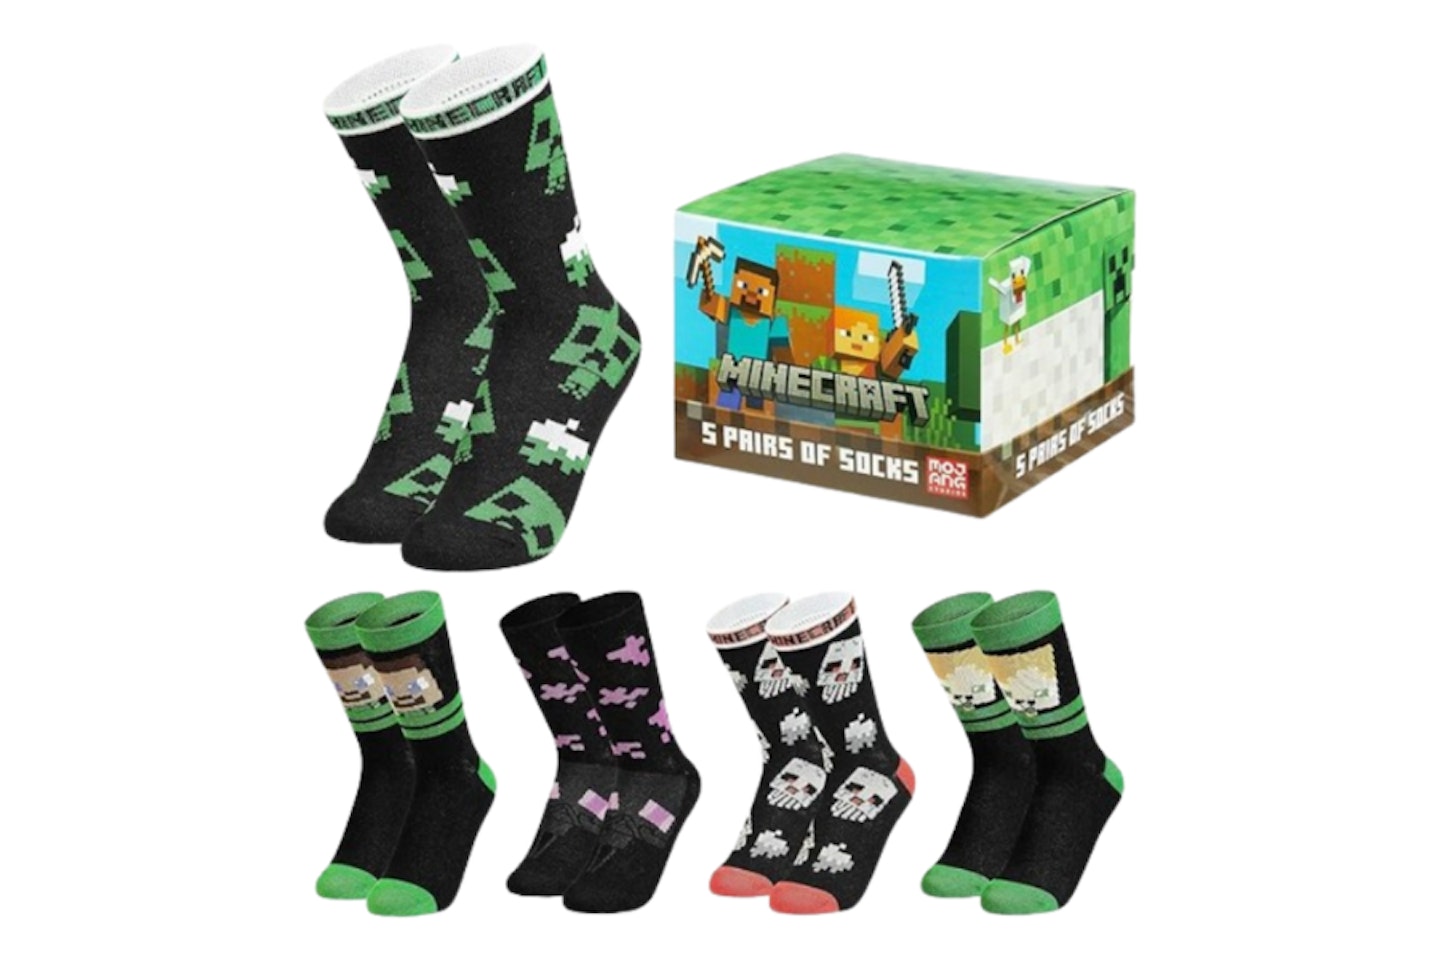 Minecraft Boys Socks - one of the best gifts for gamers